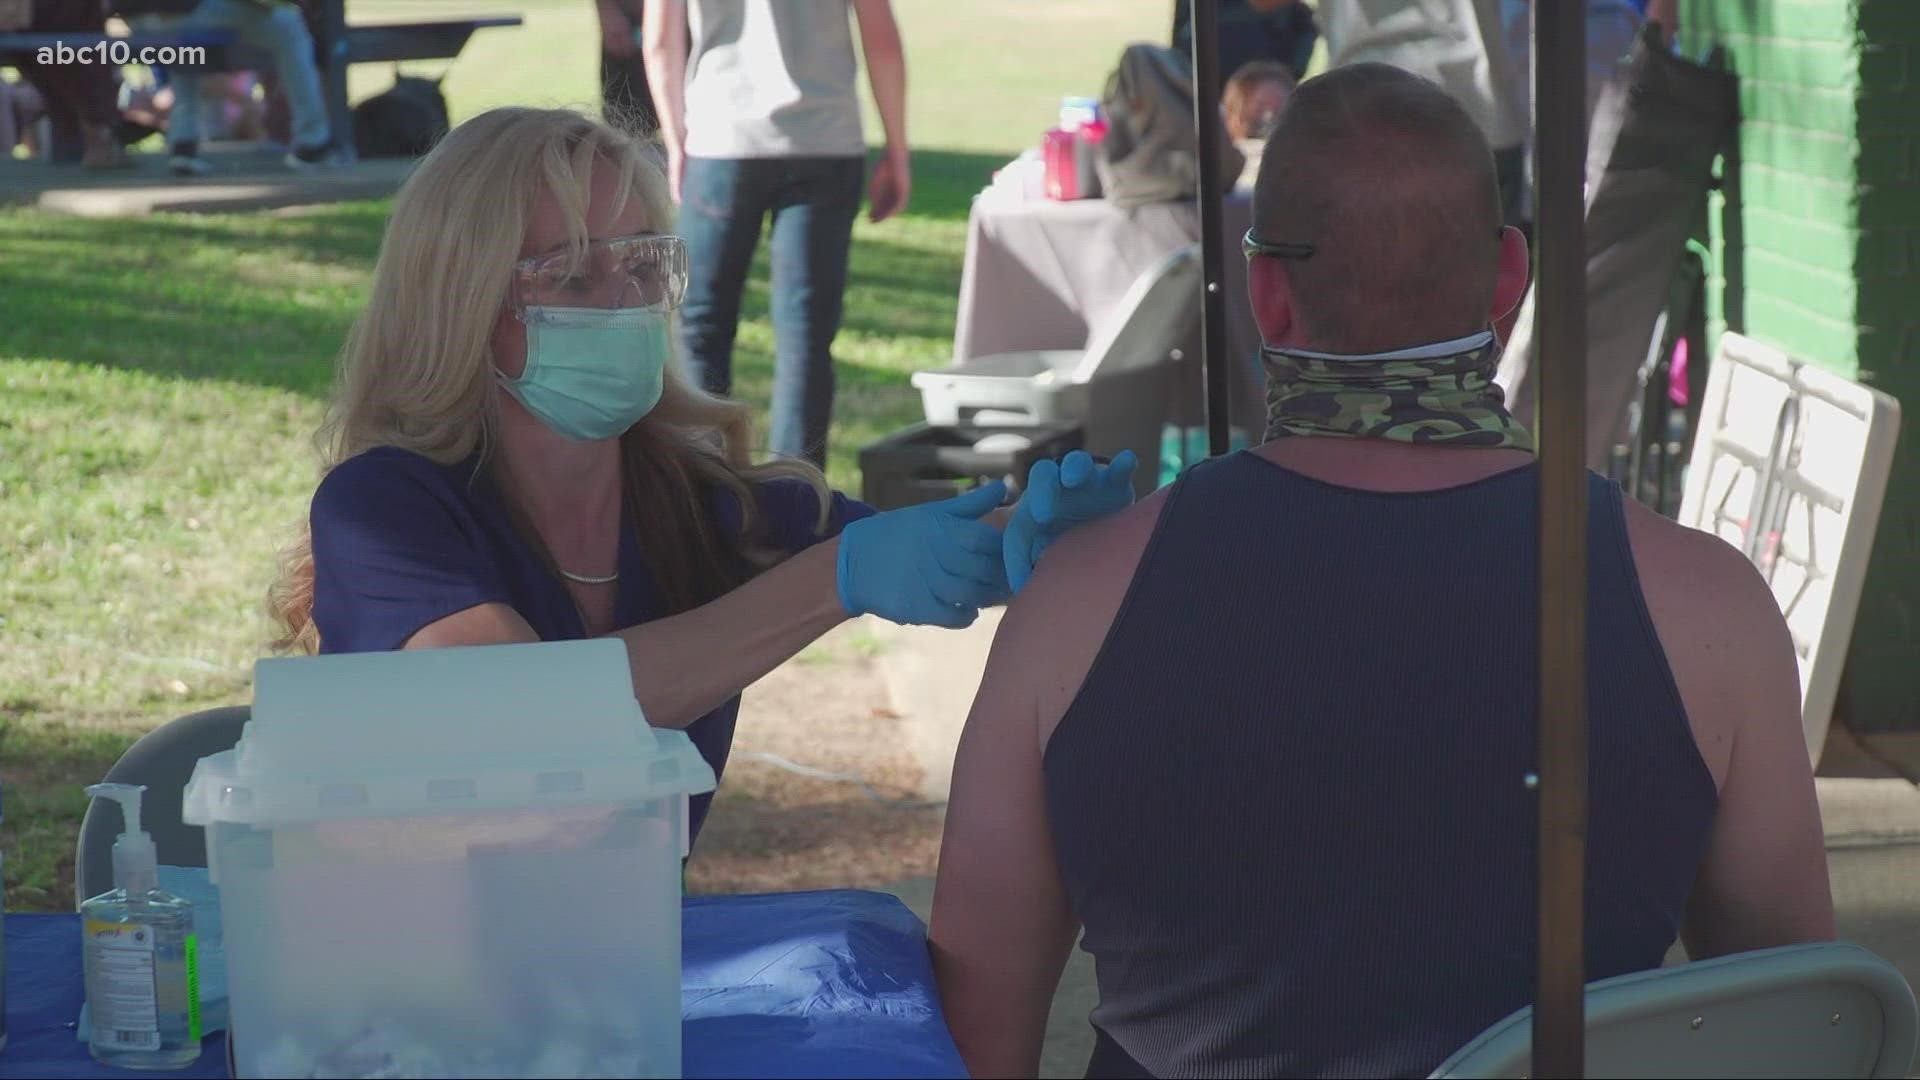 Live music, barbecue, and mobile vaccinations are the elements that Sacramento City Councilmembers say can bring a community together